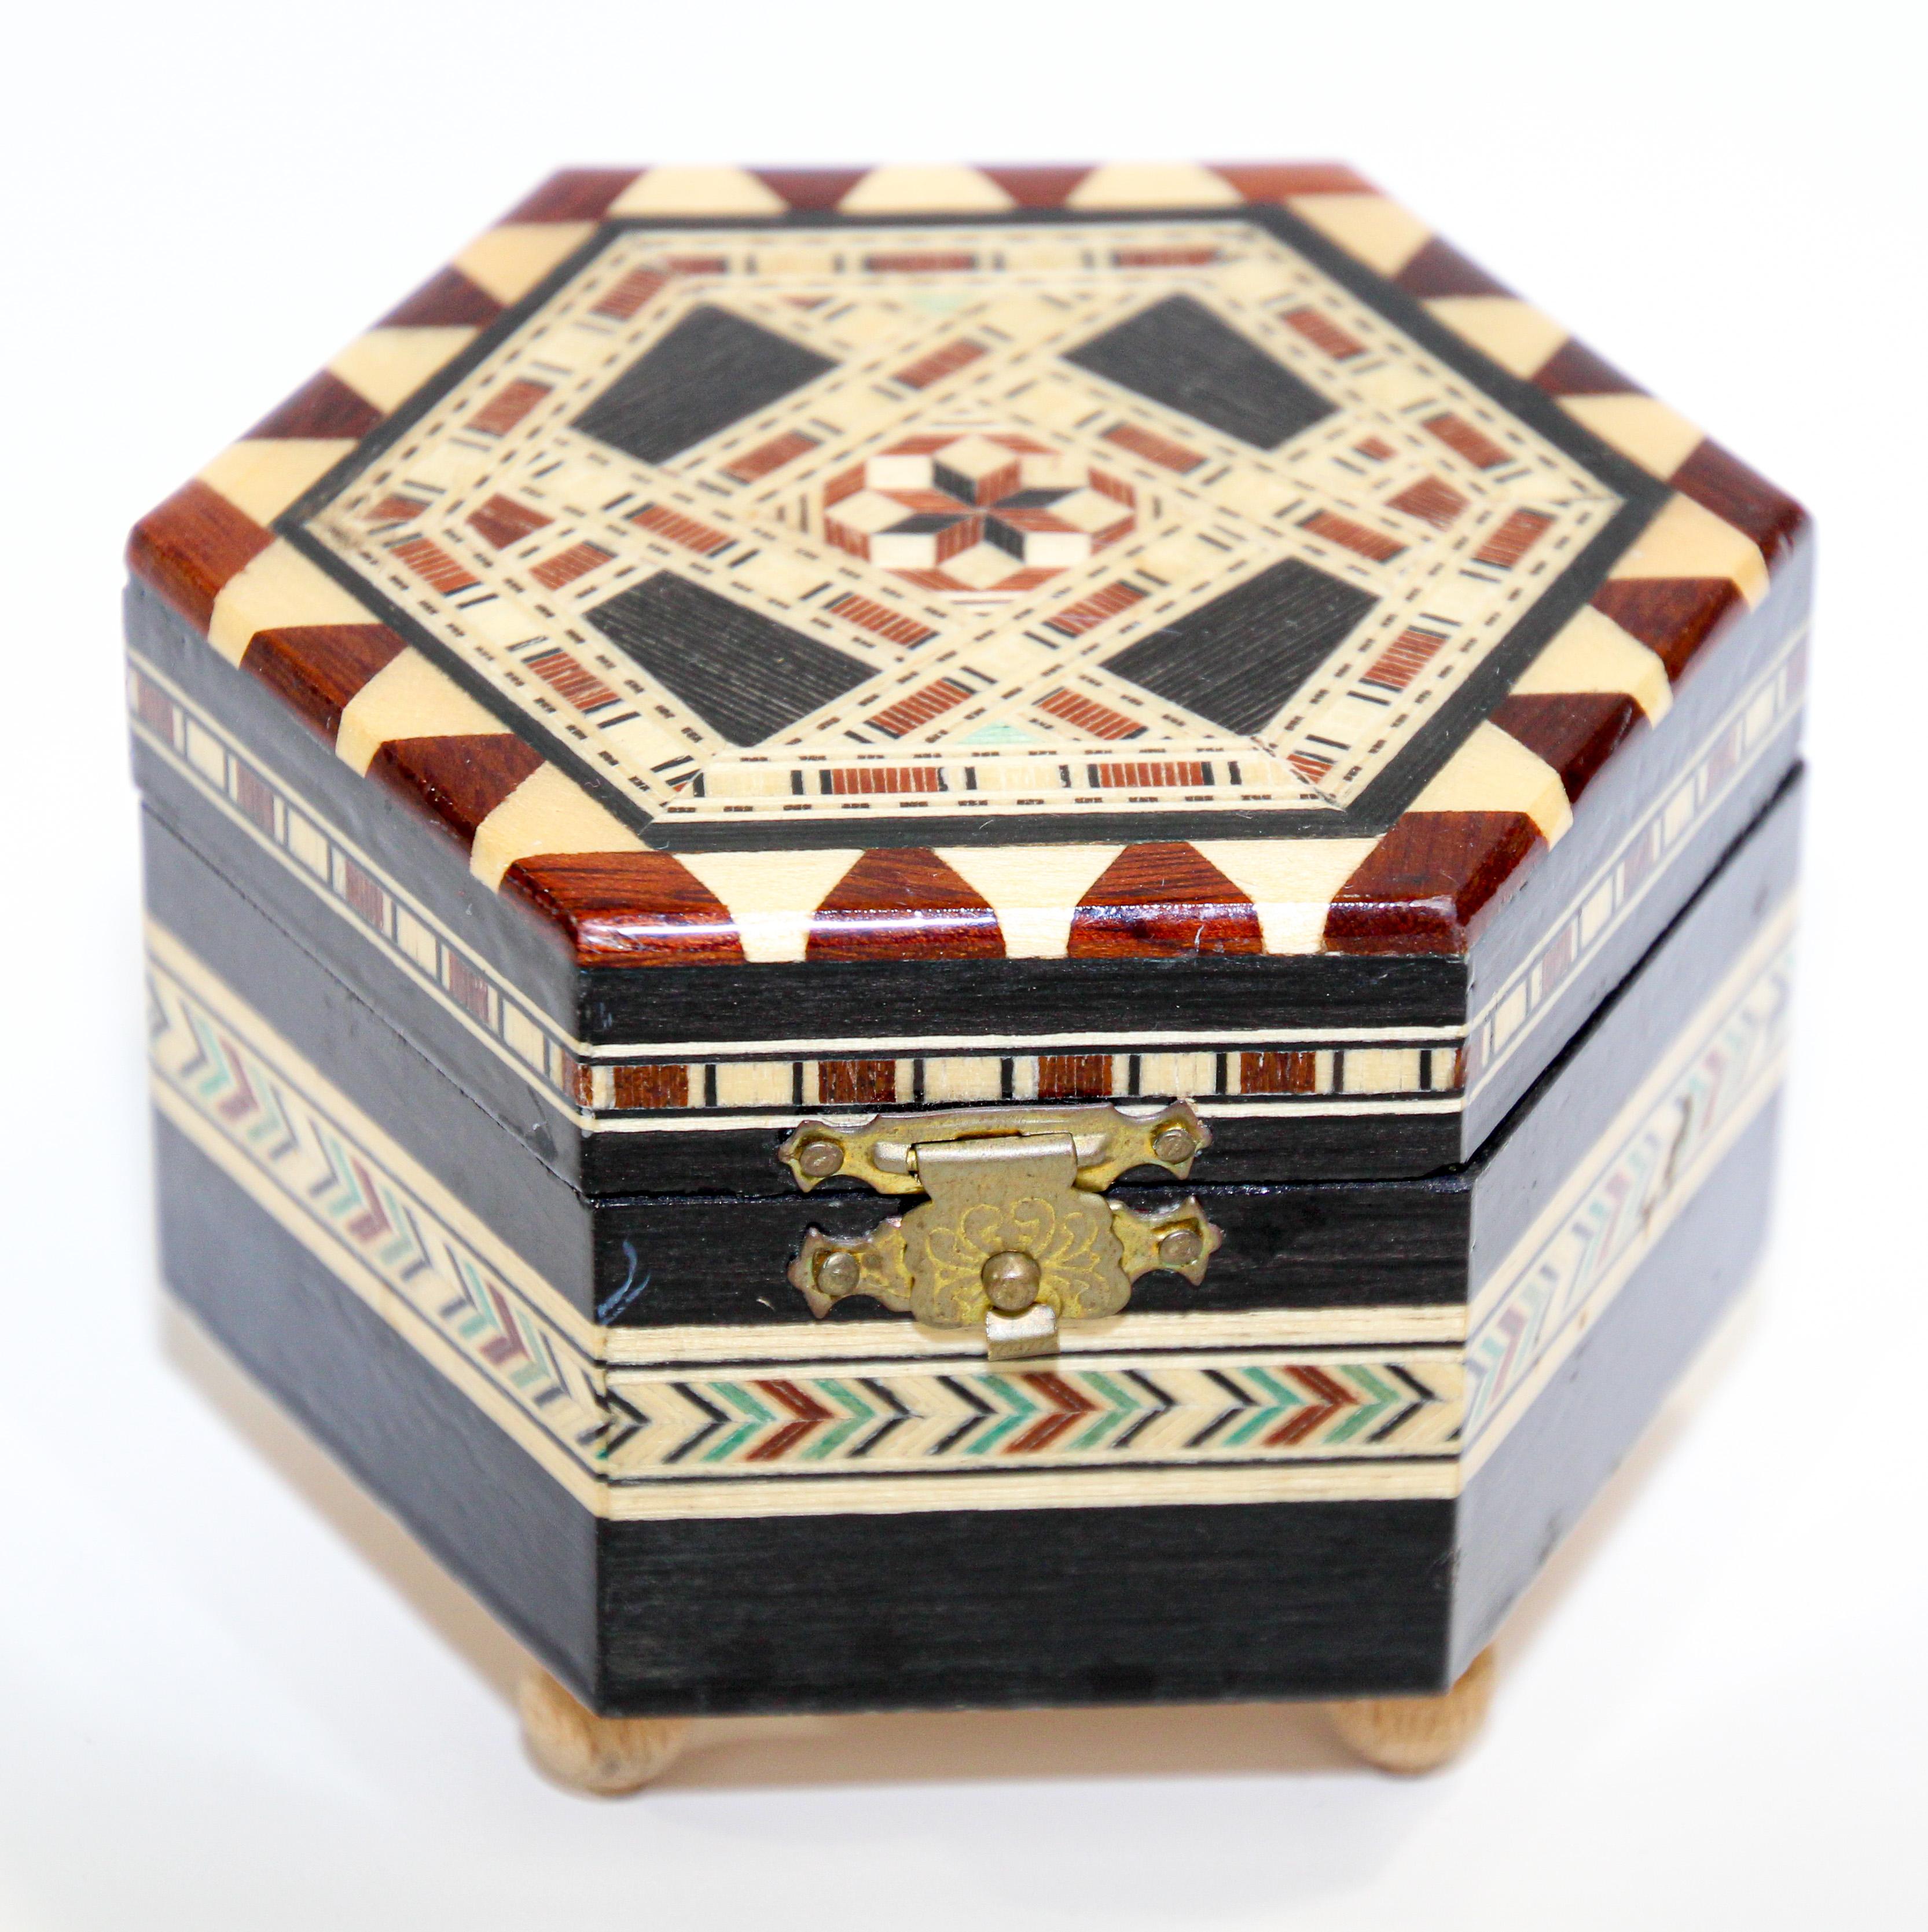 Exquisite handcrafted vintage Middle Eastern style mosaic marquetry inlaid walnut wood footed music box.
Handcrafted in Spain in the Moorish Syrian style with red velvet lined and a mirror.
Decorative Spanish inlaid Marquetry trinket box intricately